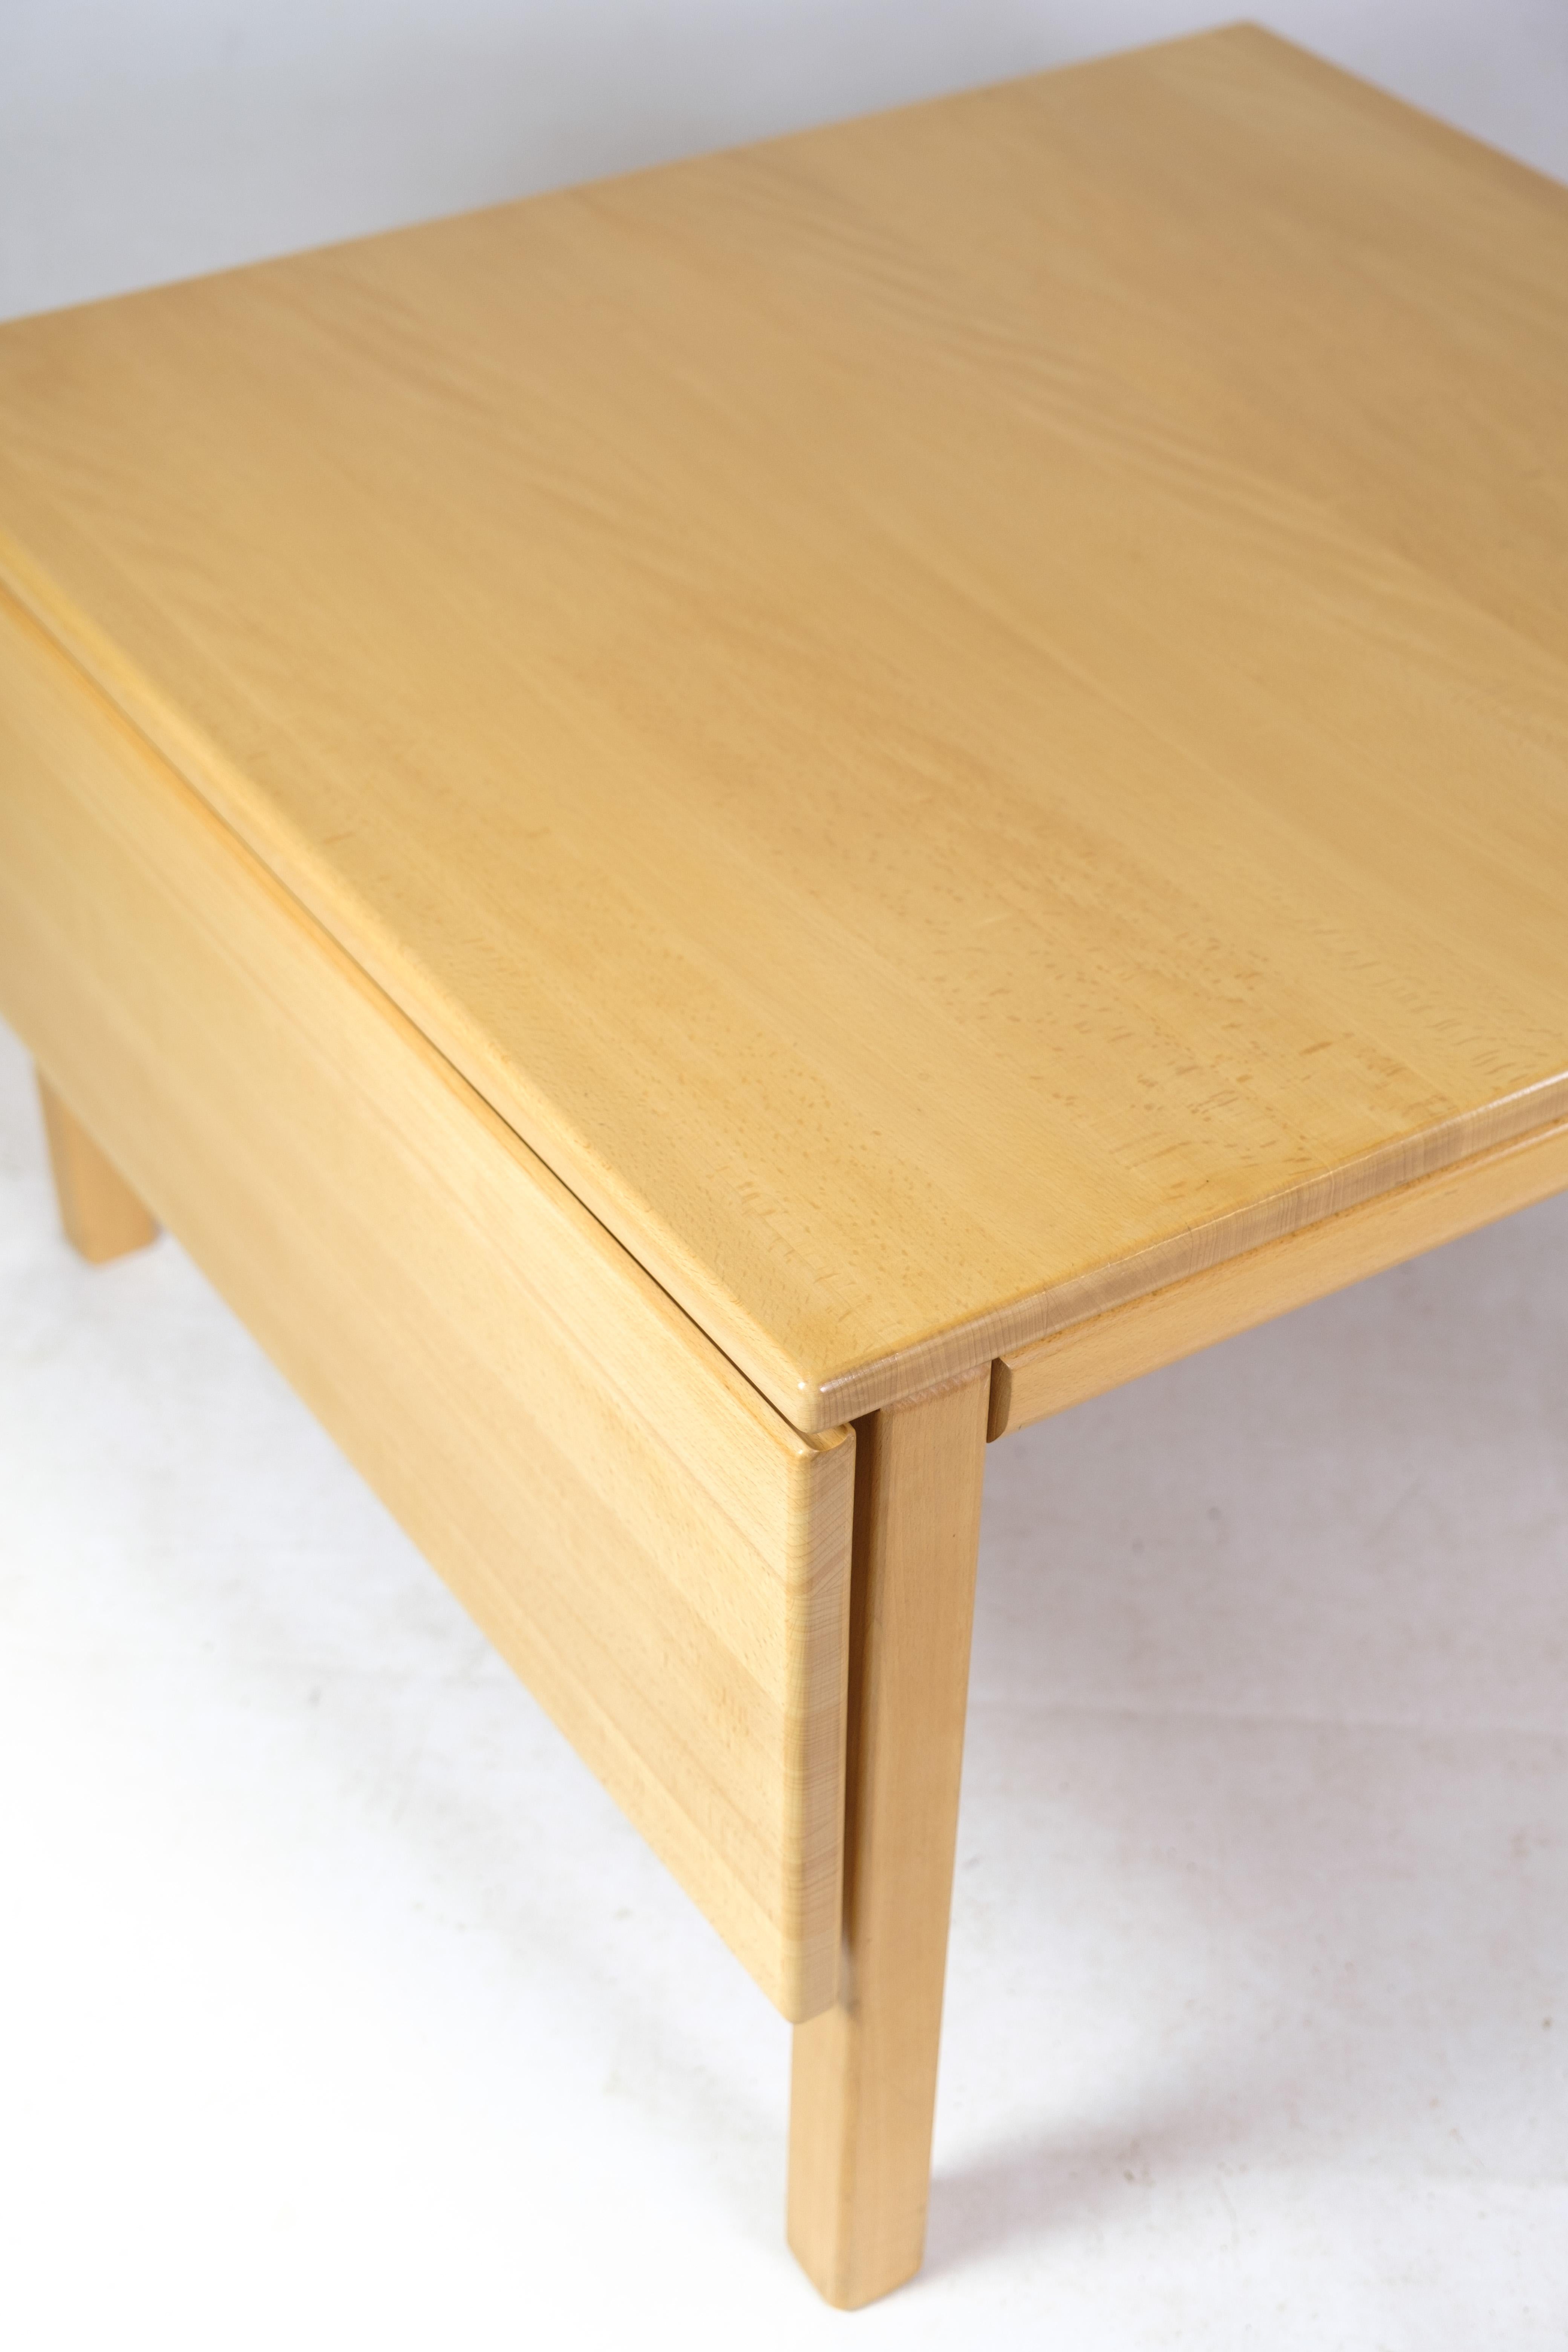 Scandinavian Modern Coffee Table in Oak by Haslev Furniture from the 1960s For Sale